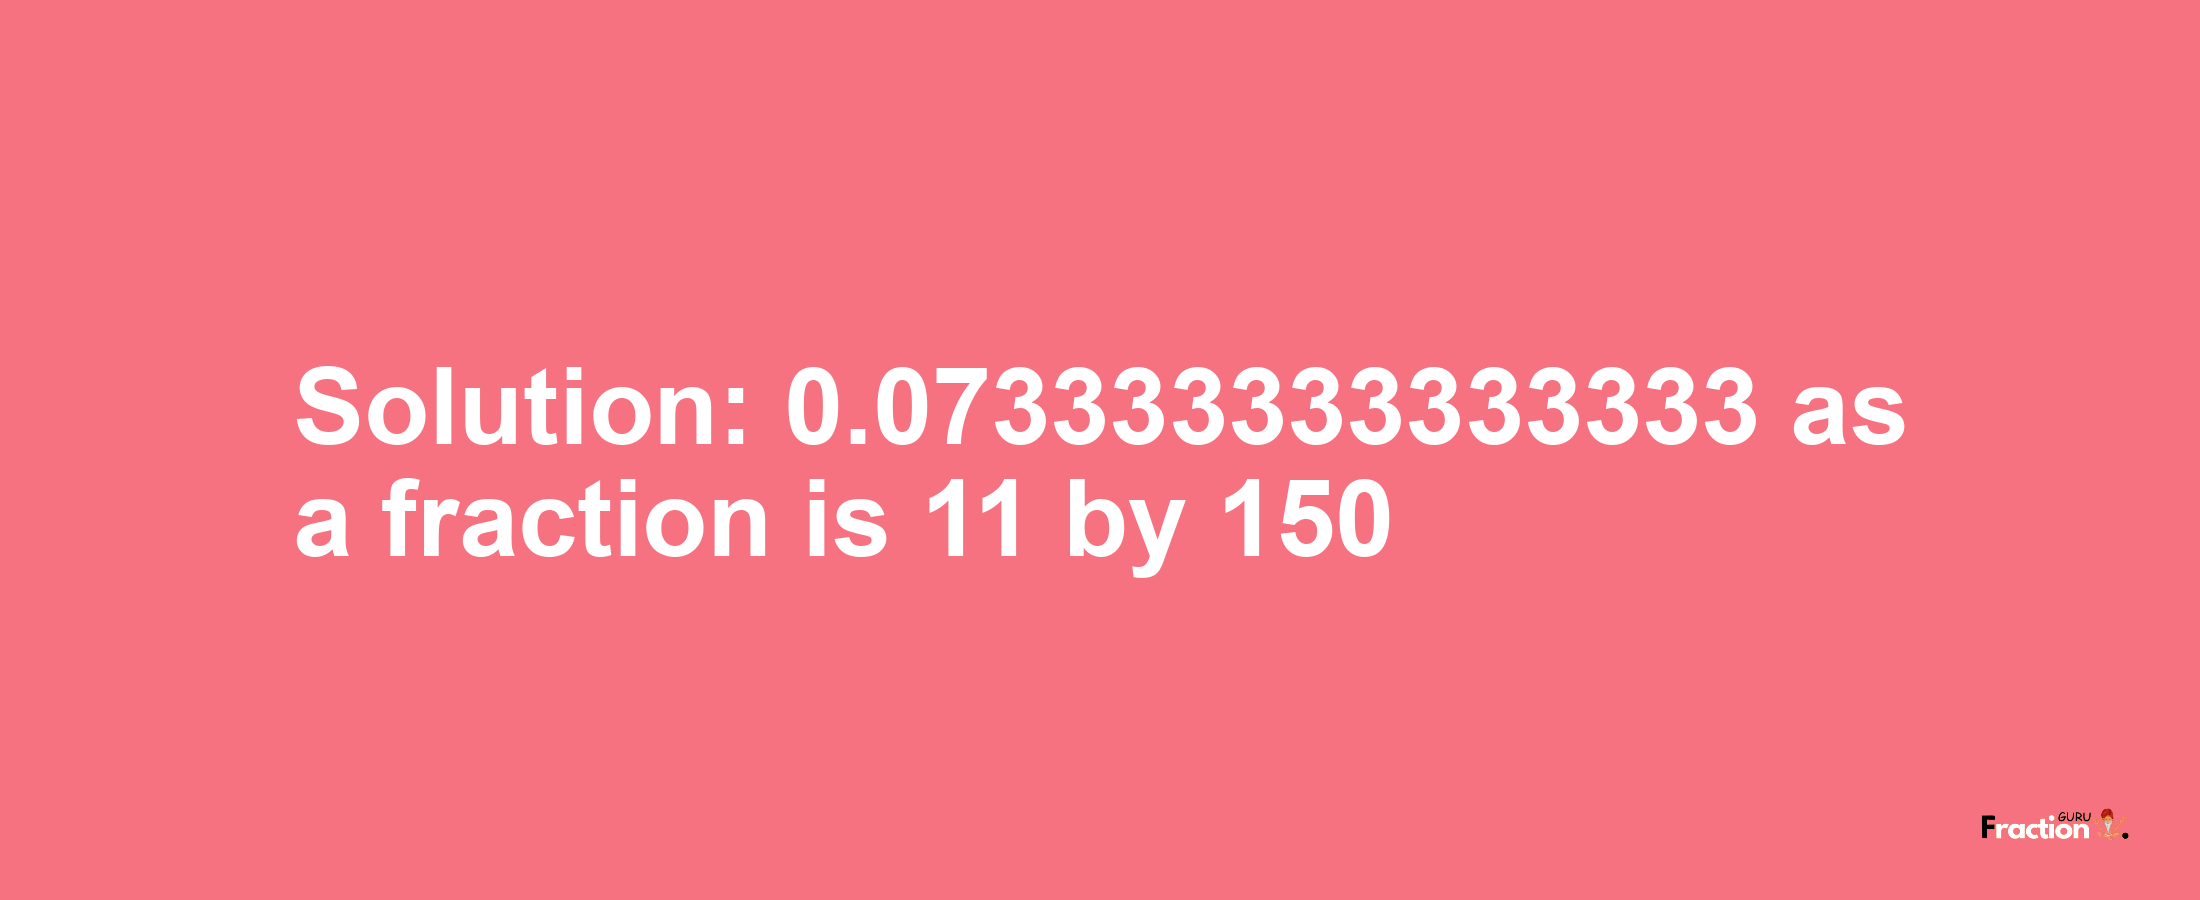 Solution:0.073333333333333 as a fraction is 11/150